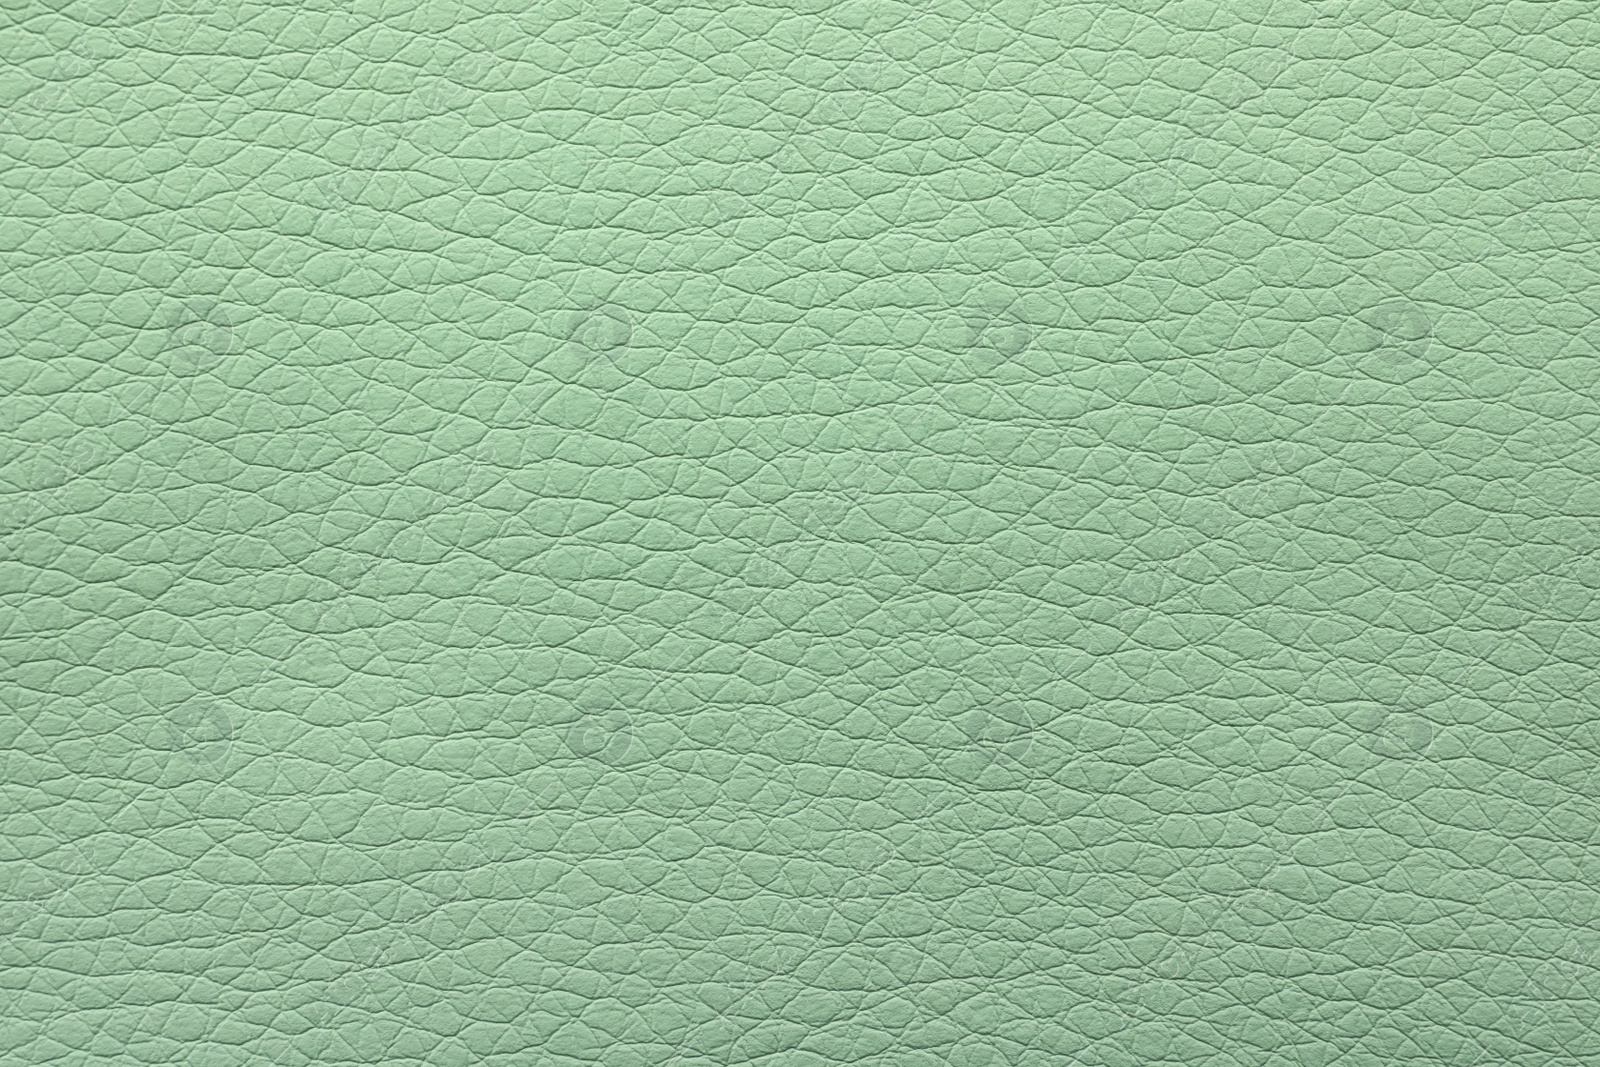 Photo of Texture of light green leather as background, closeup